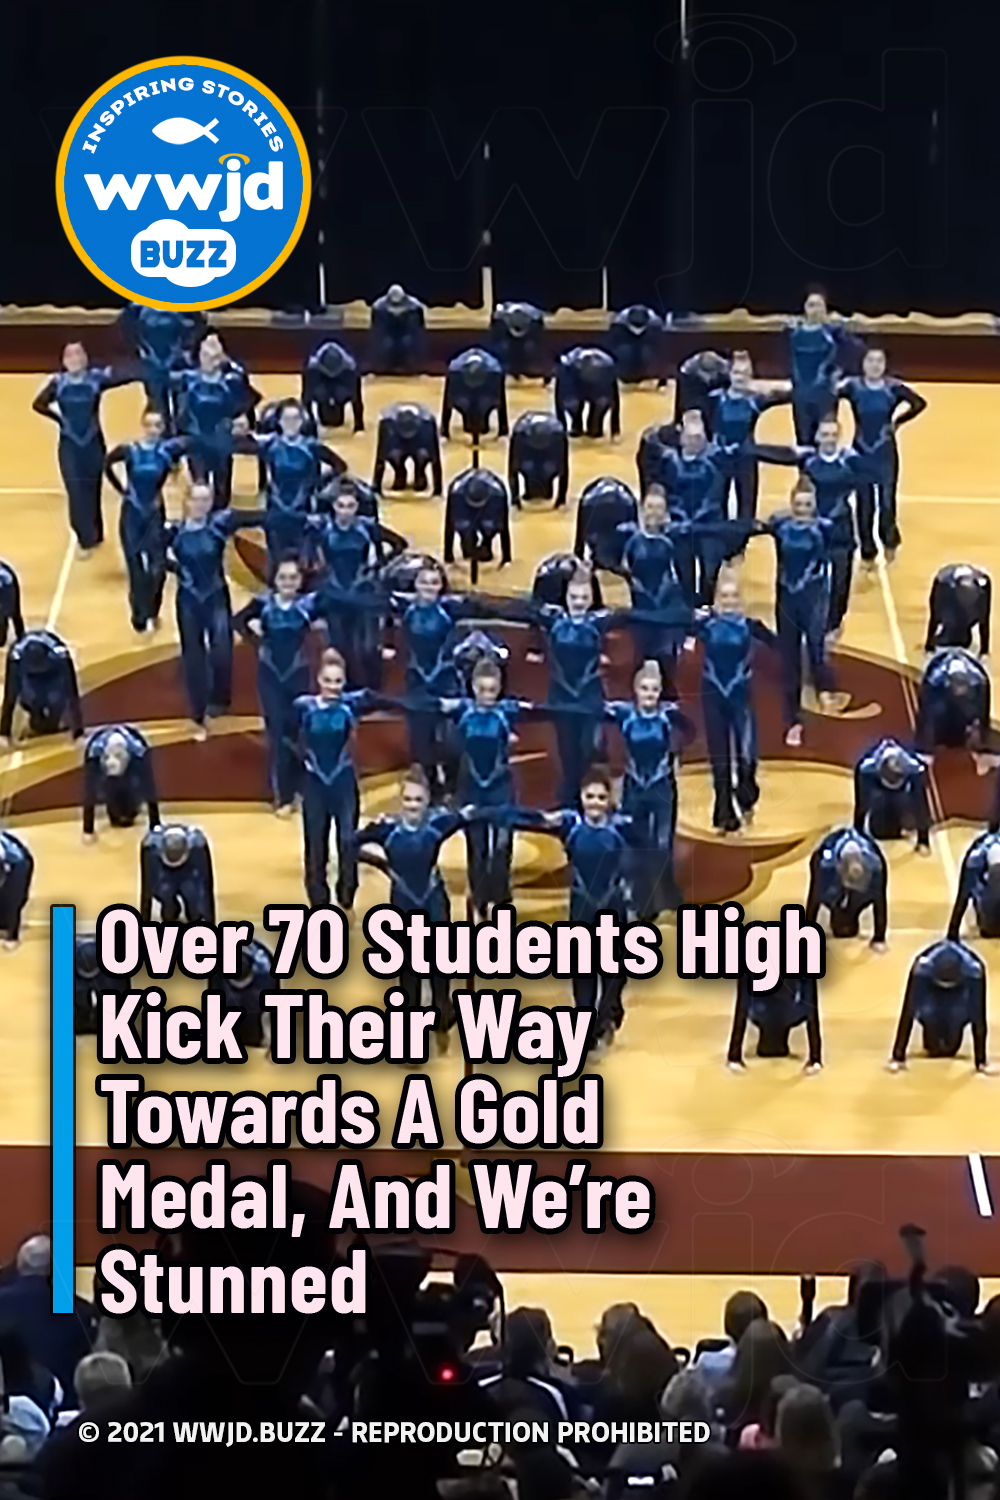 Over 70 Students High Kick Their Way Towards A Gold Medal, And We’re Stunned